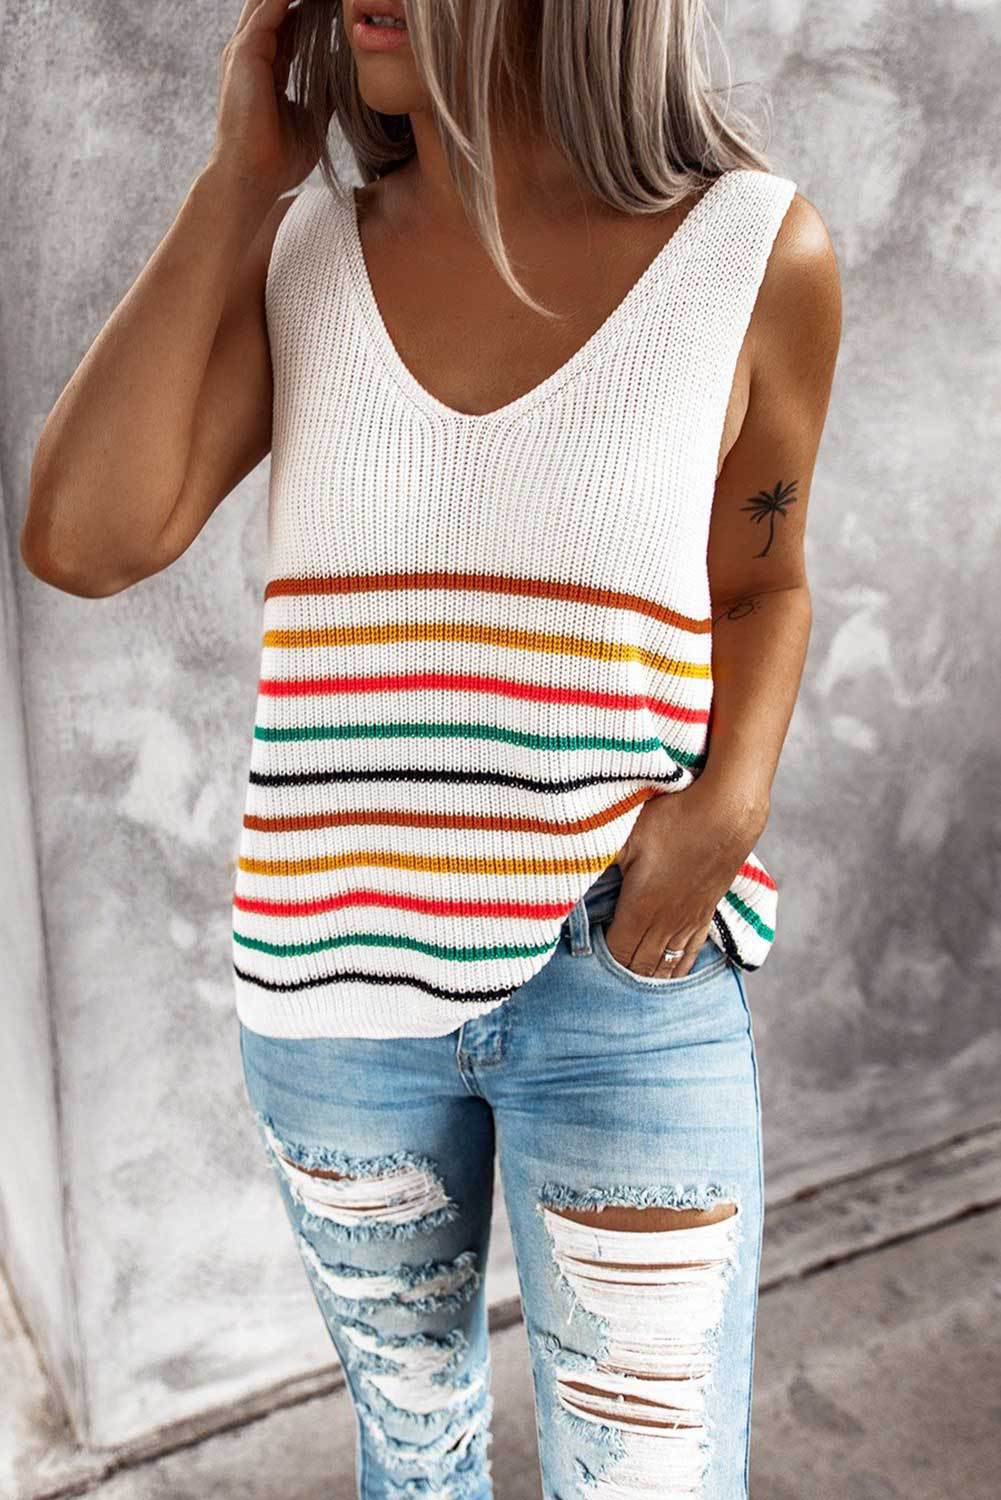 Sleeveless Summer Colorful Striped Blouse Shirt